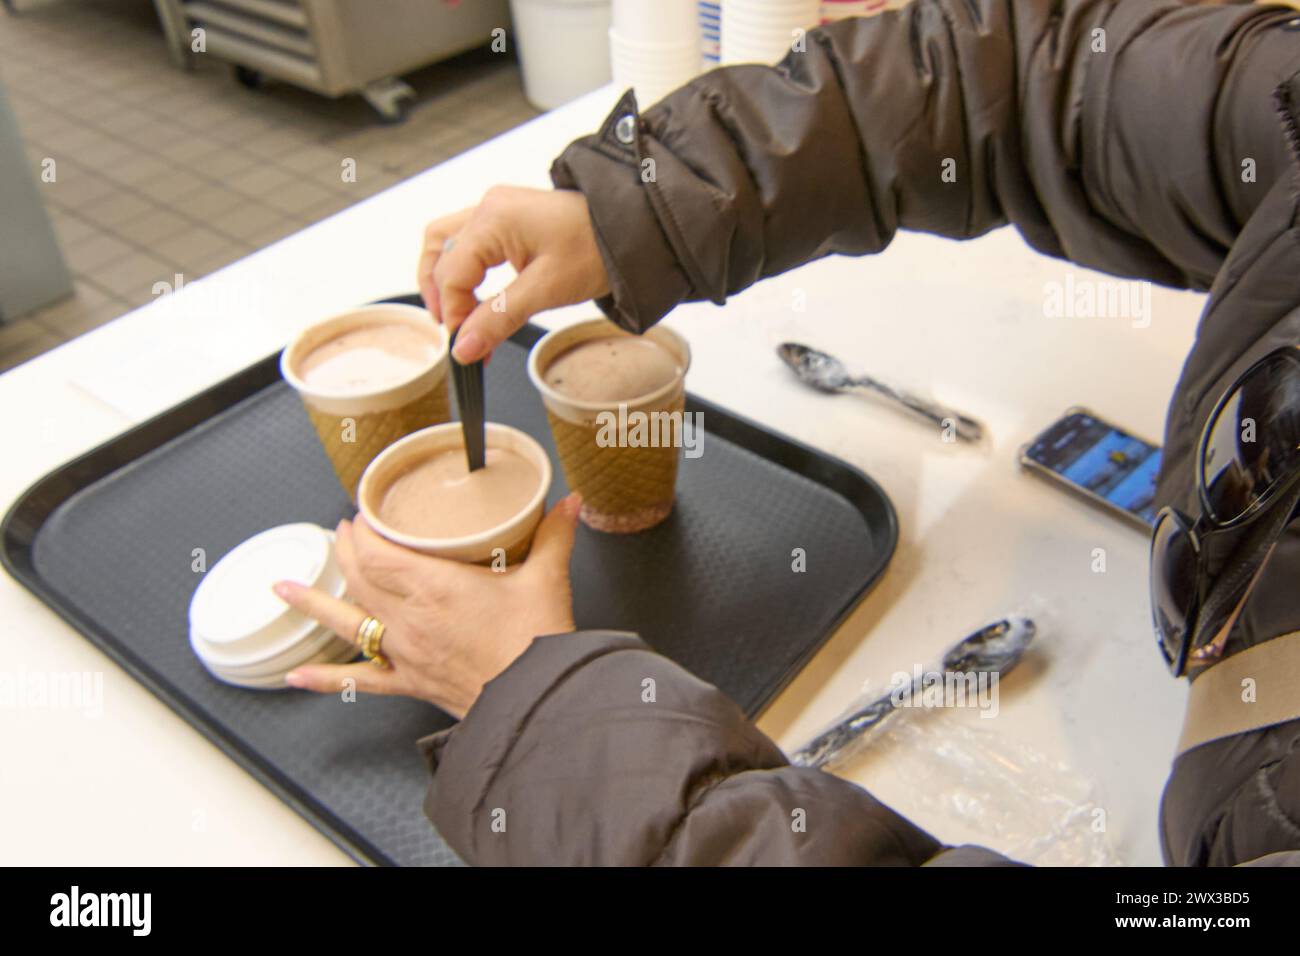 A hand clutches a tray with three cups of coffee to go in a coffee shop, symbolizing the convenience and efficiency of service in urban life. Stock Photo